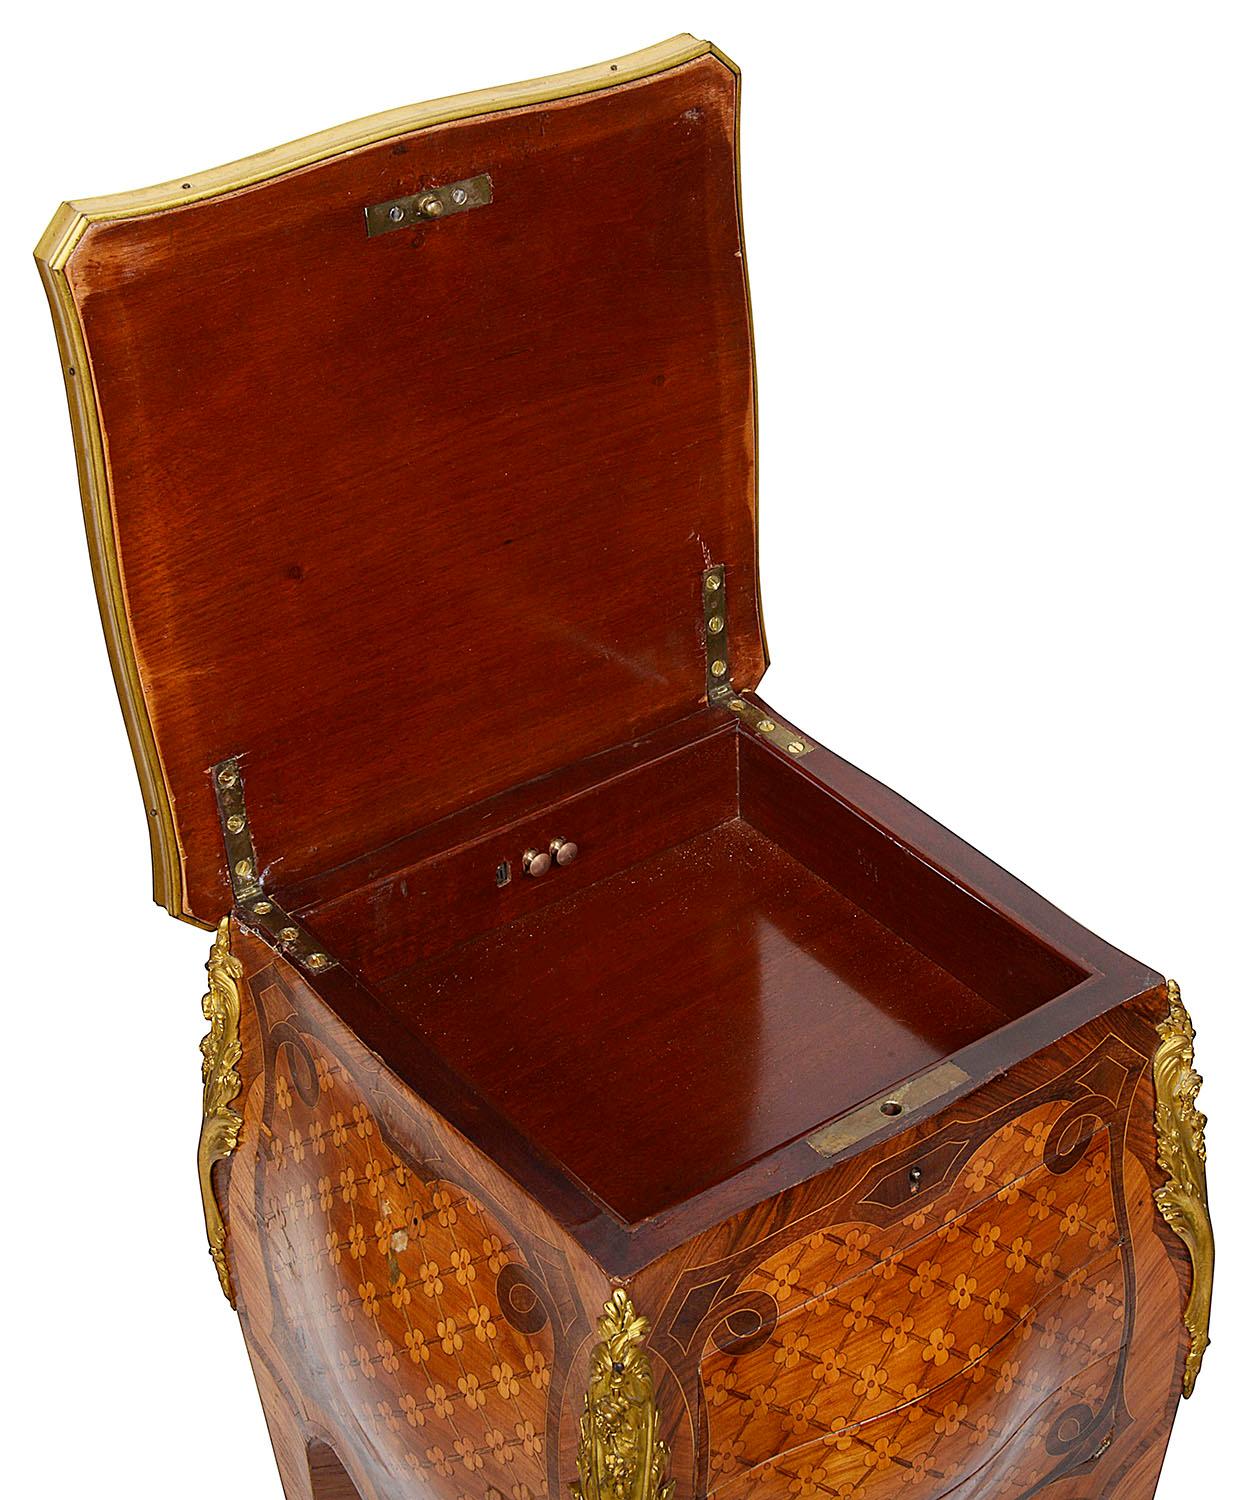 A very good quality late 19th century French Louis XVI style parquetry inlaid side table, having a hinged top, opening to reveal a compartment within. Three drawers beneath, raised on elegant cabriole legs, wonderfully fine quality gilded ormolu